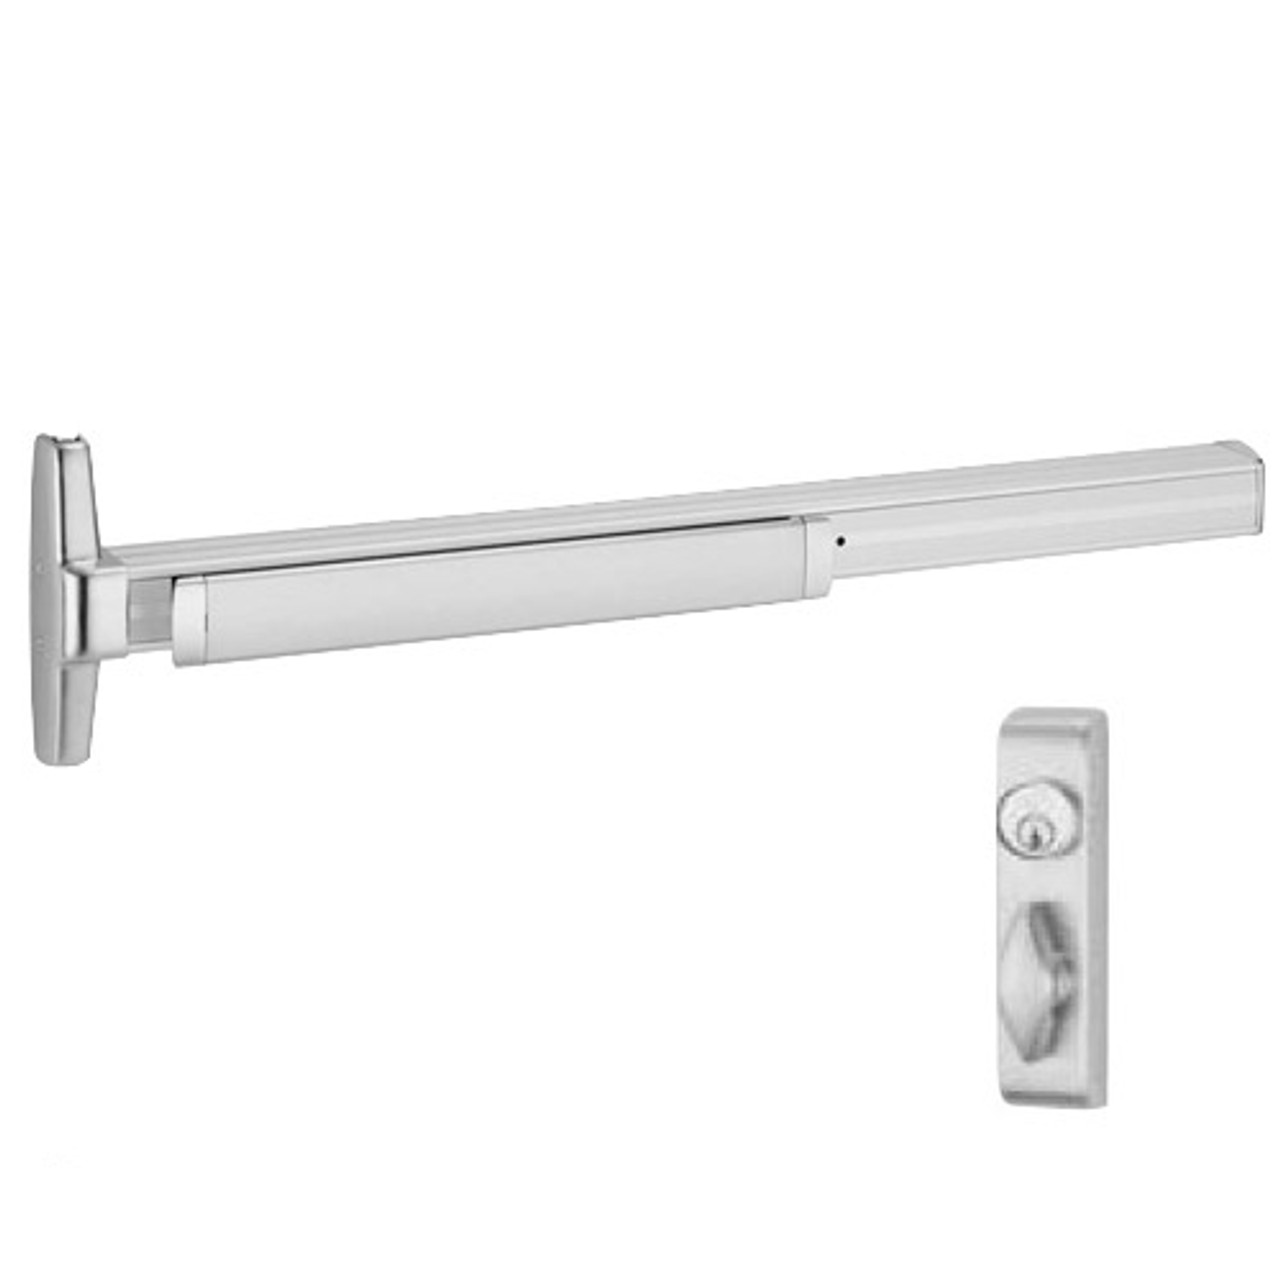 3348A-T-US28-4 Von Duprin Exit Device in Anodized Aluminum